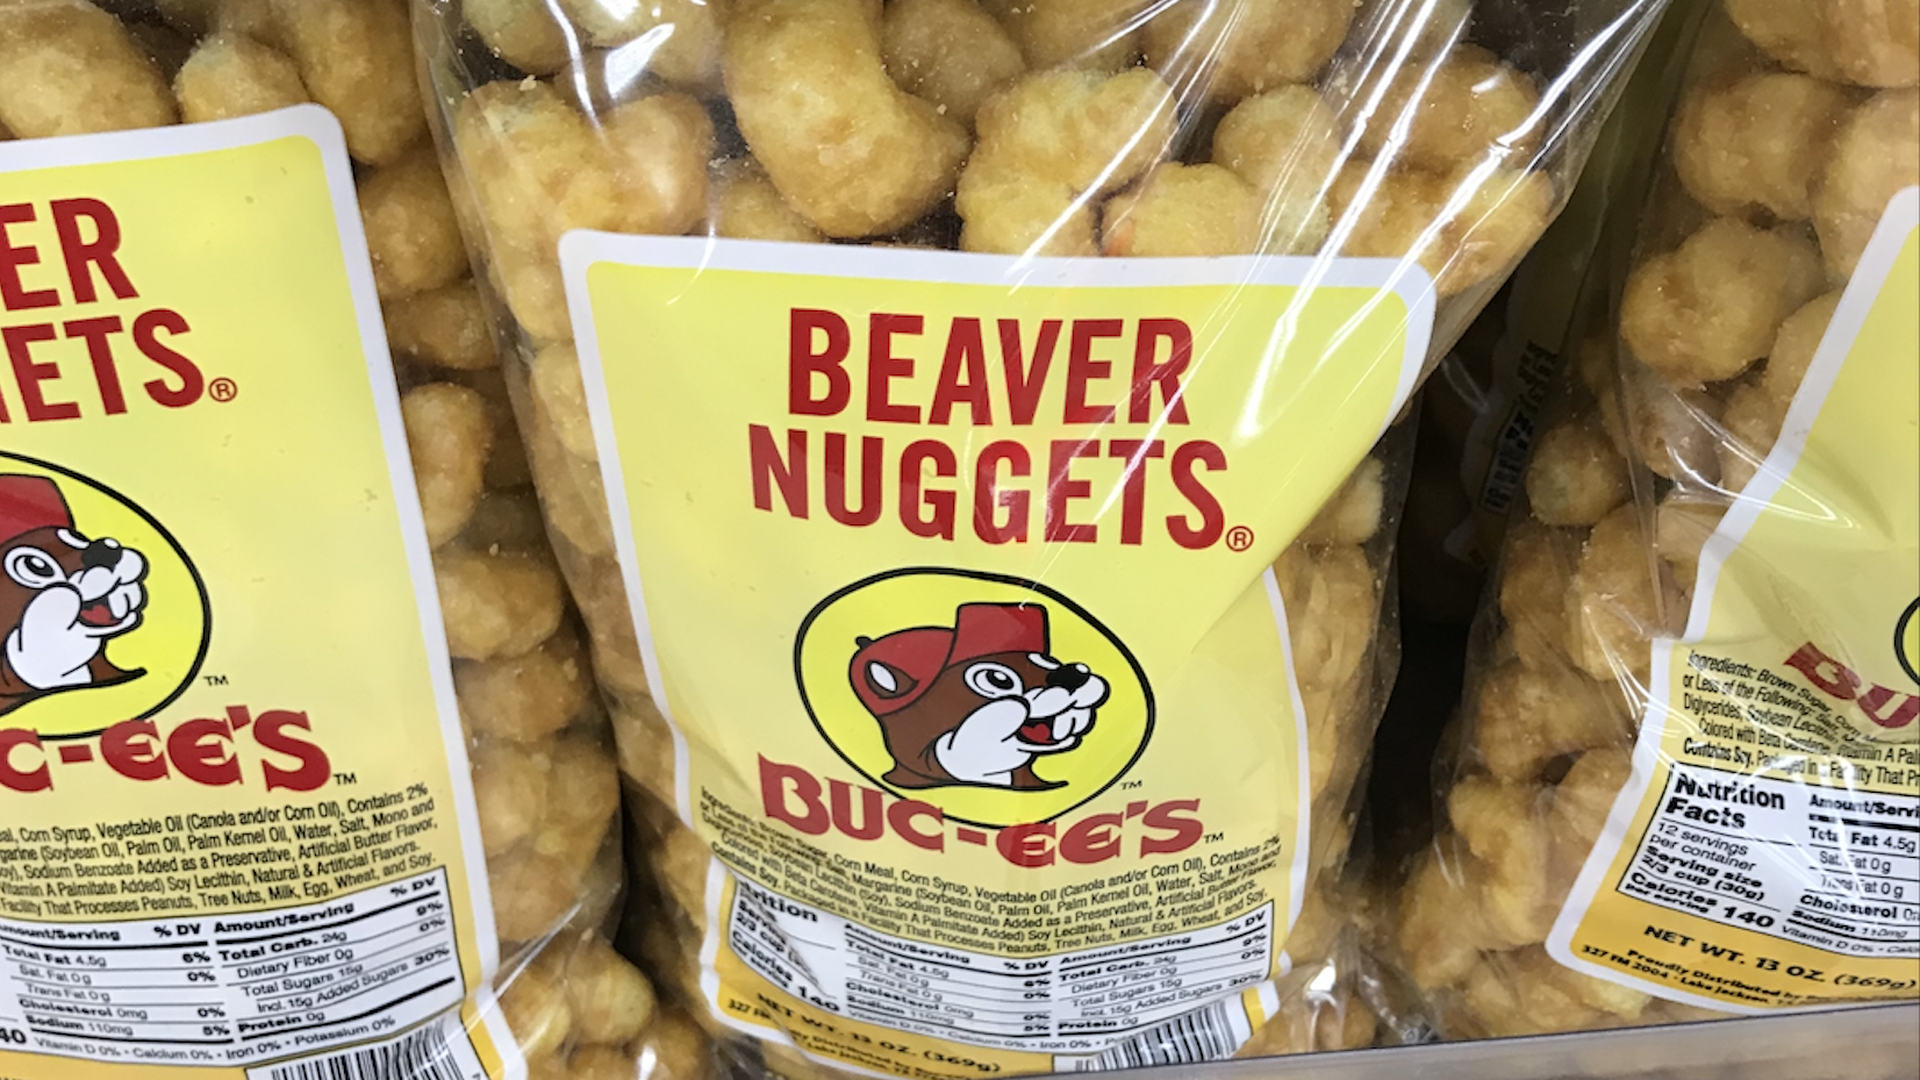 Three bags of beaver nuggets